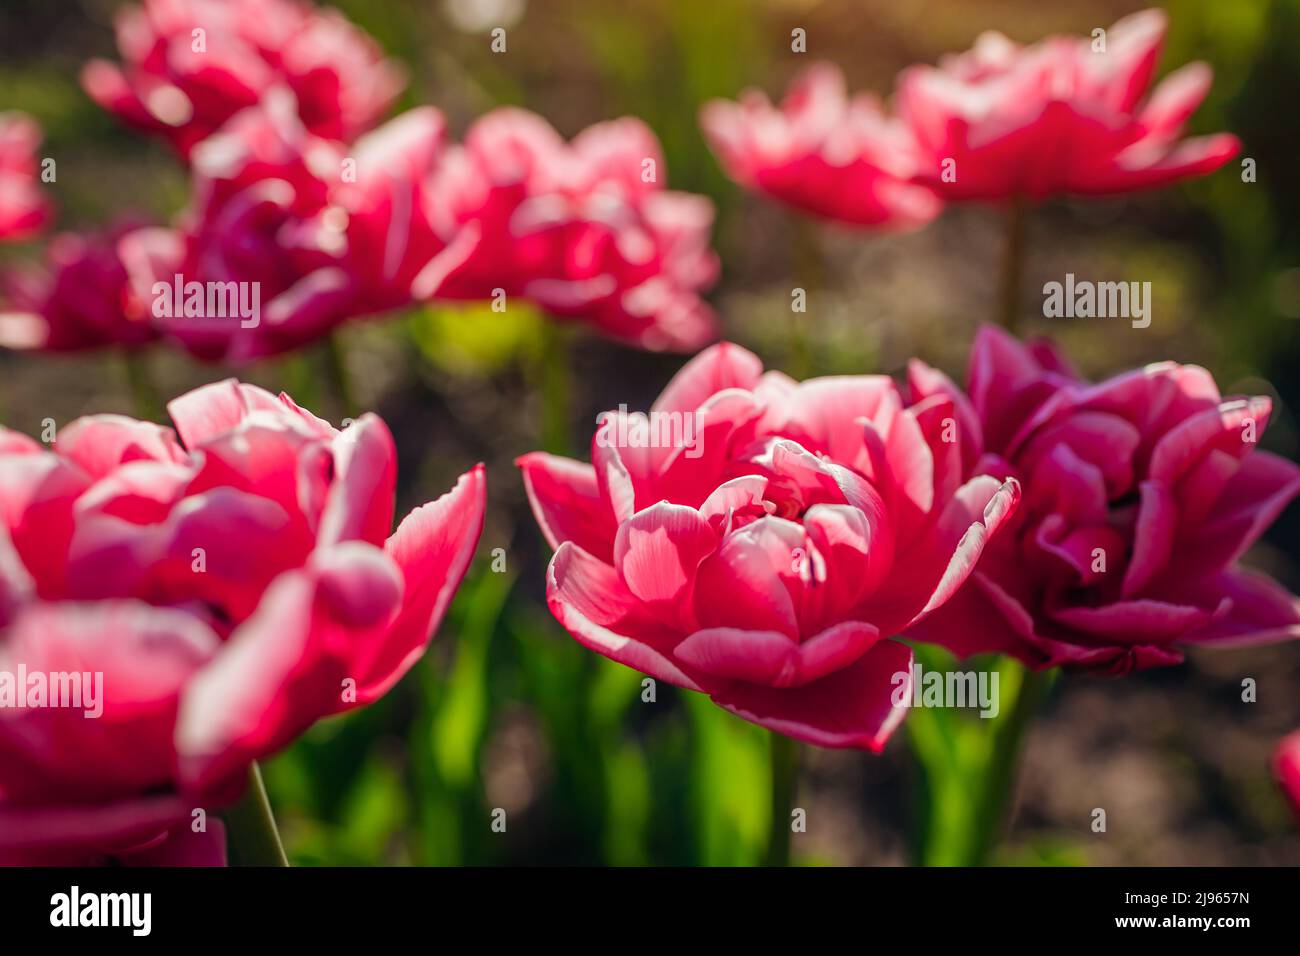 Close up of pink peony tulips with white edge growing in spring garden. Columbus variety. Flowers blooming outdoors Stock Photo